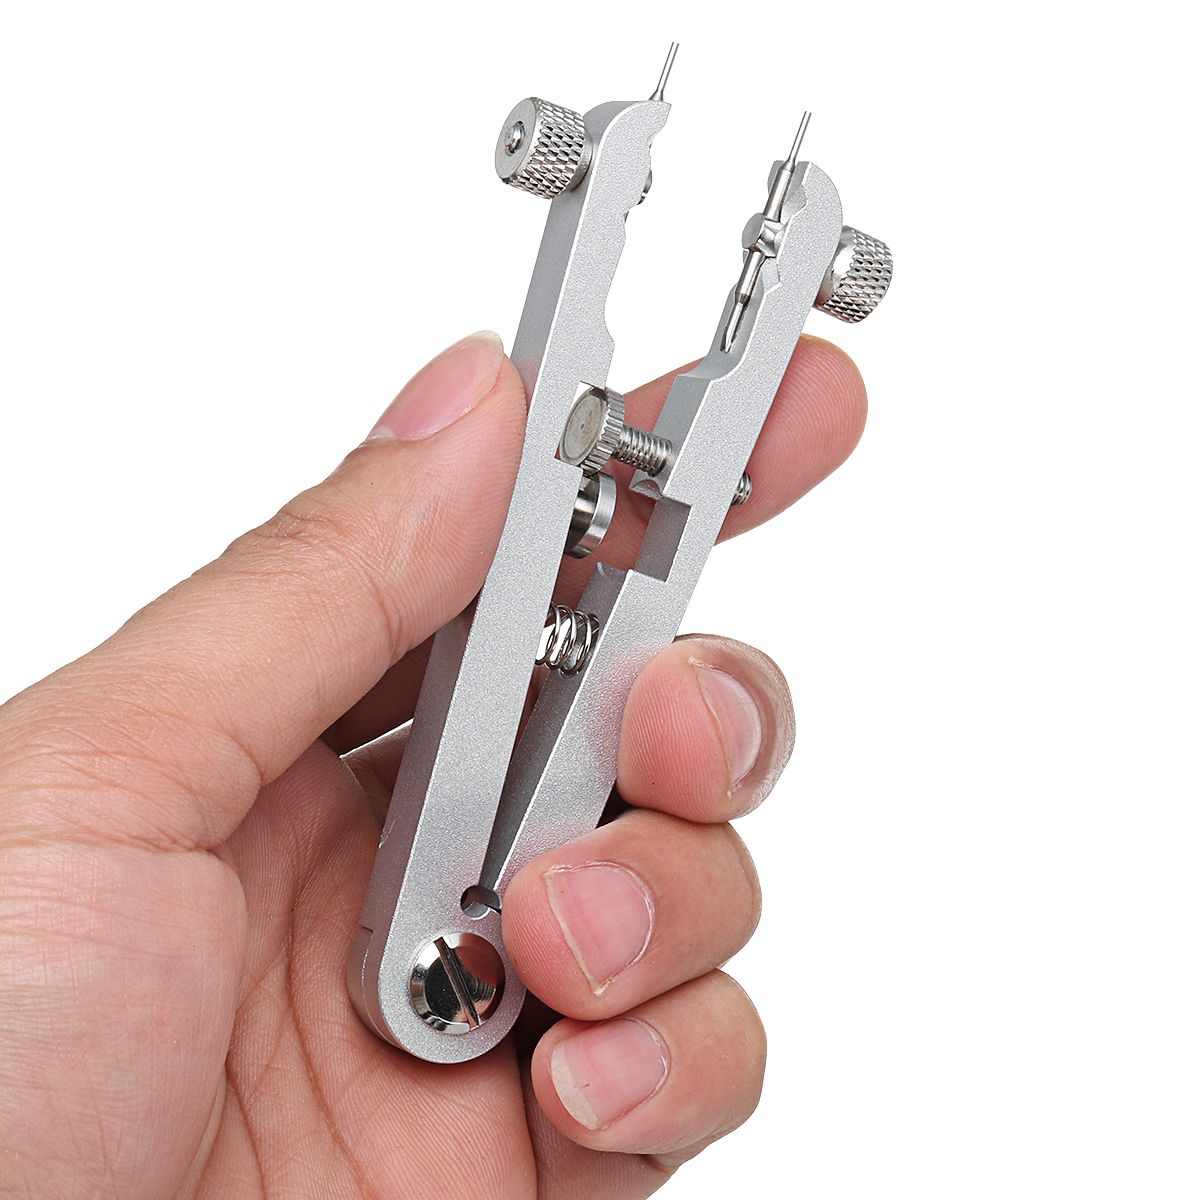 Watch-Bracelet-Spring-Bar-Standard-Plier-Remover-Replace-Removing-Tool-Pliers-Tool-1587214